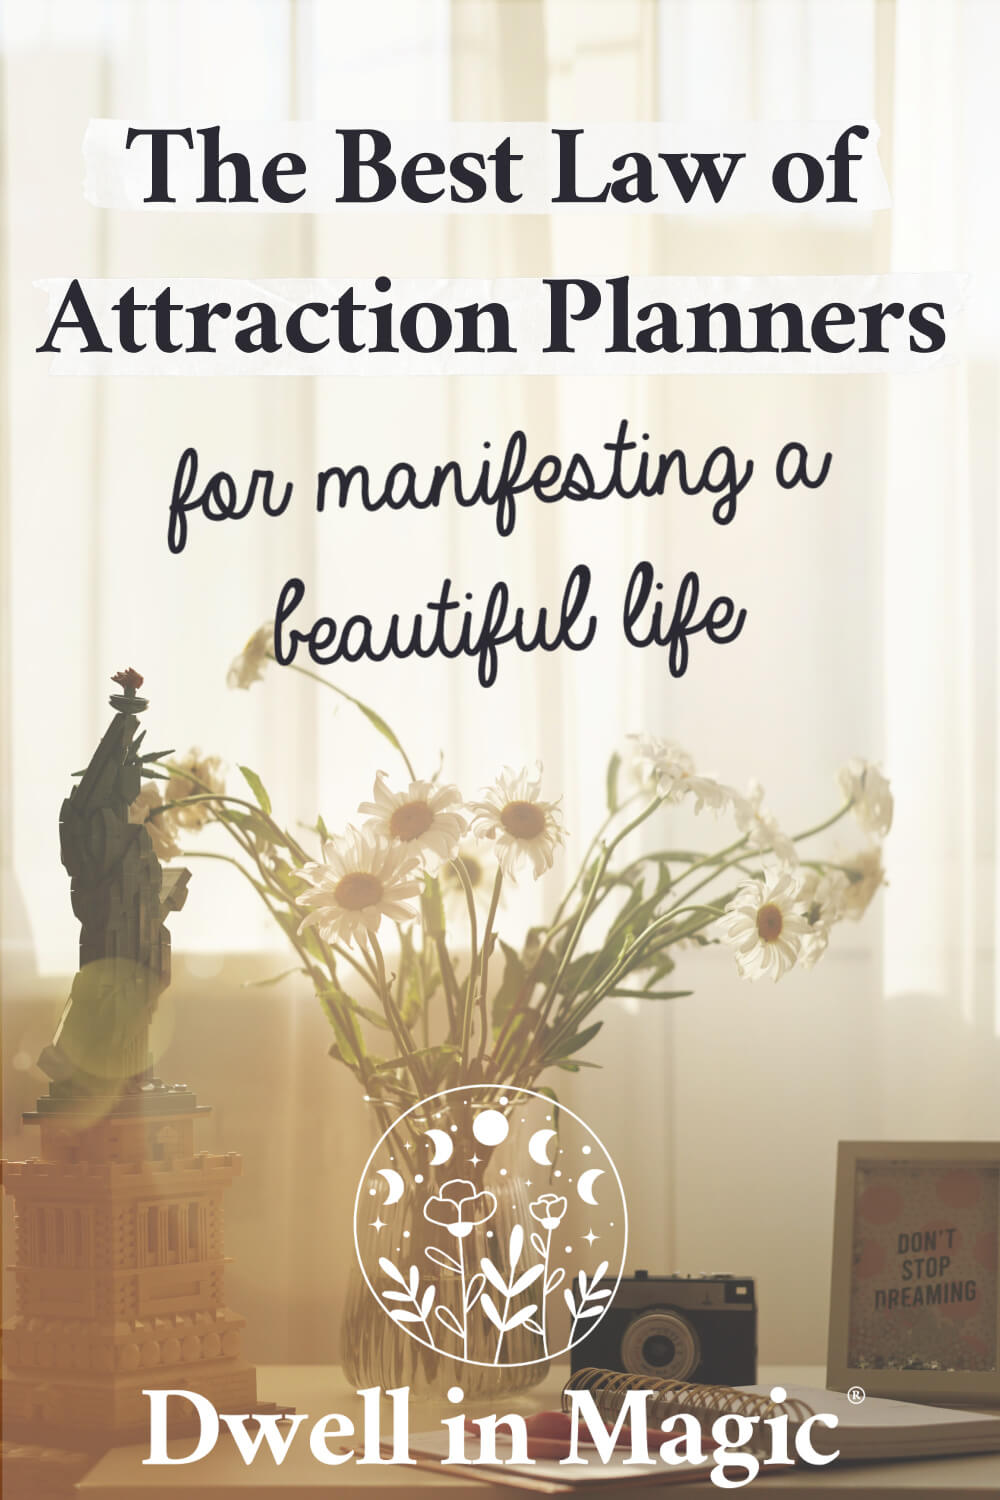 A list of the best law of attraction planners for manifesting your dream life